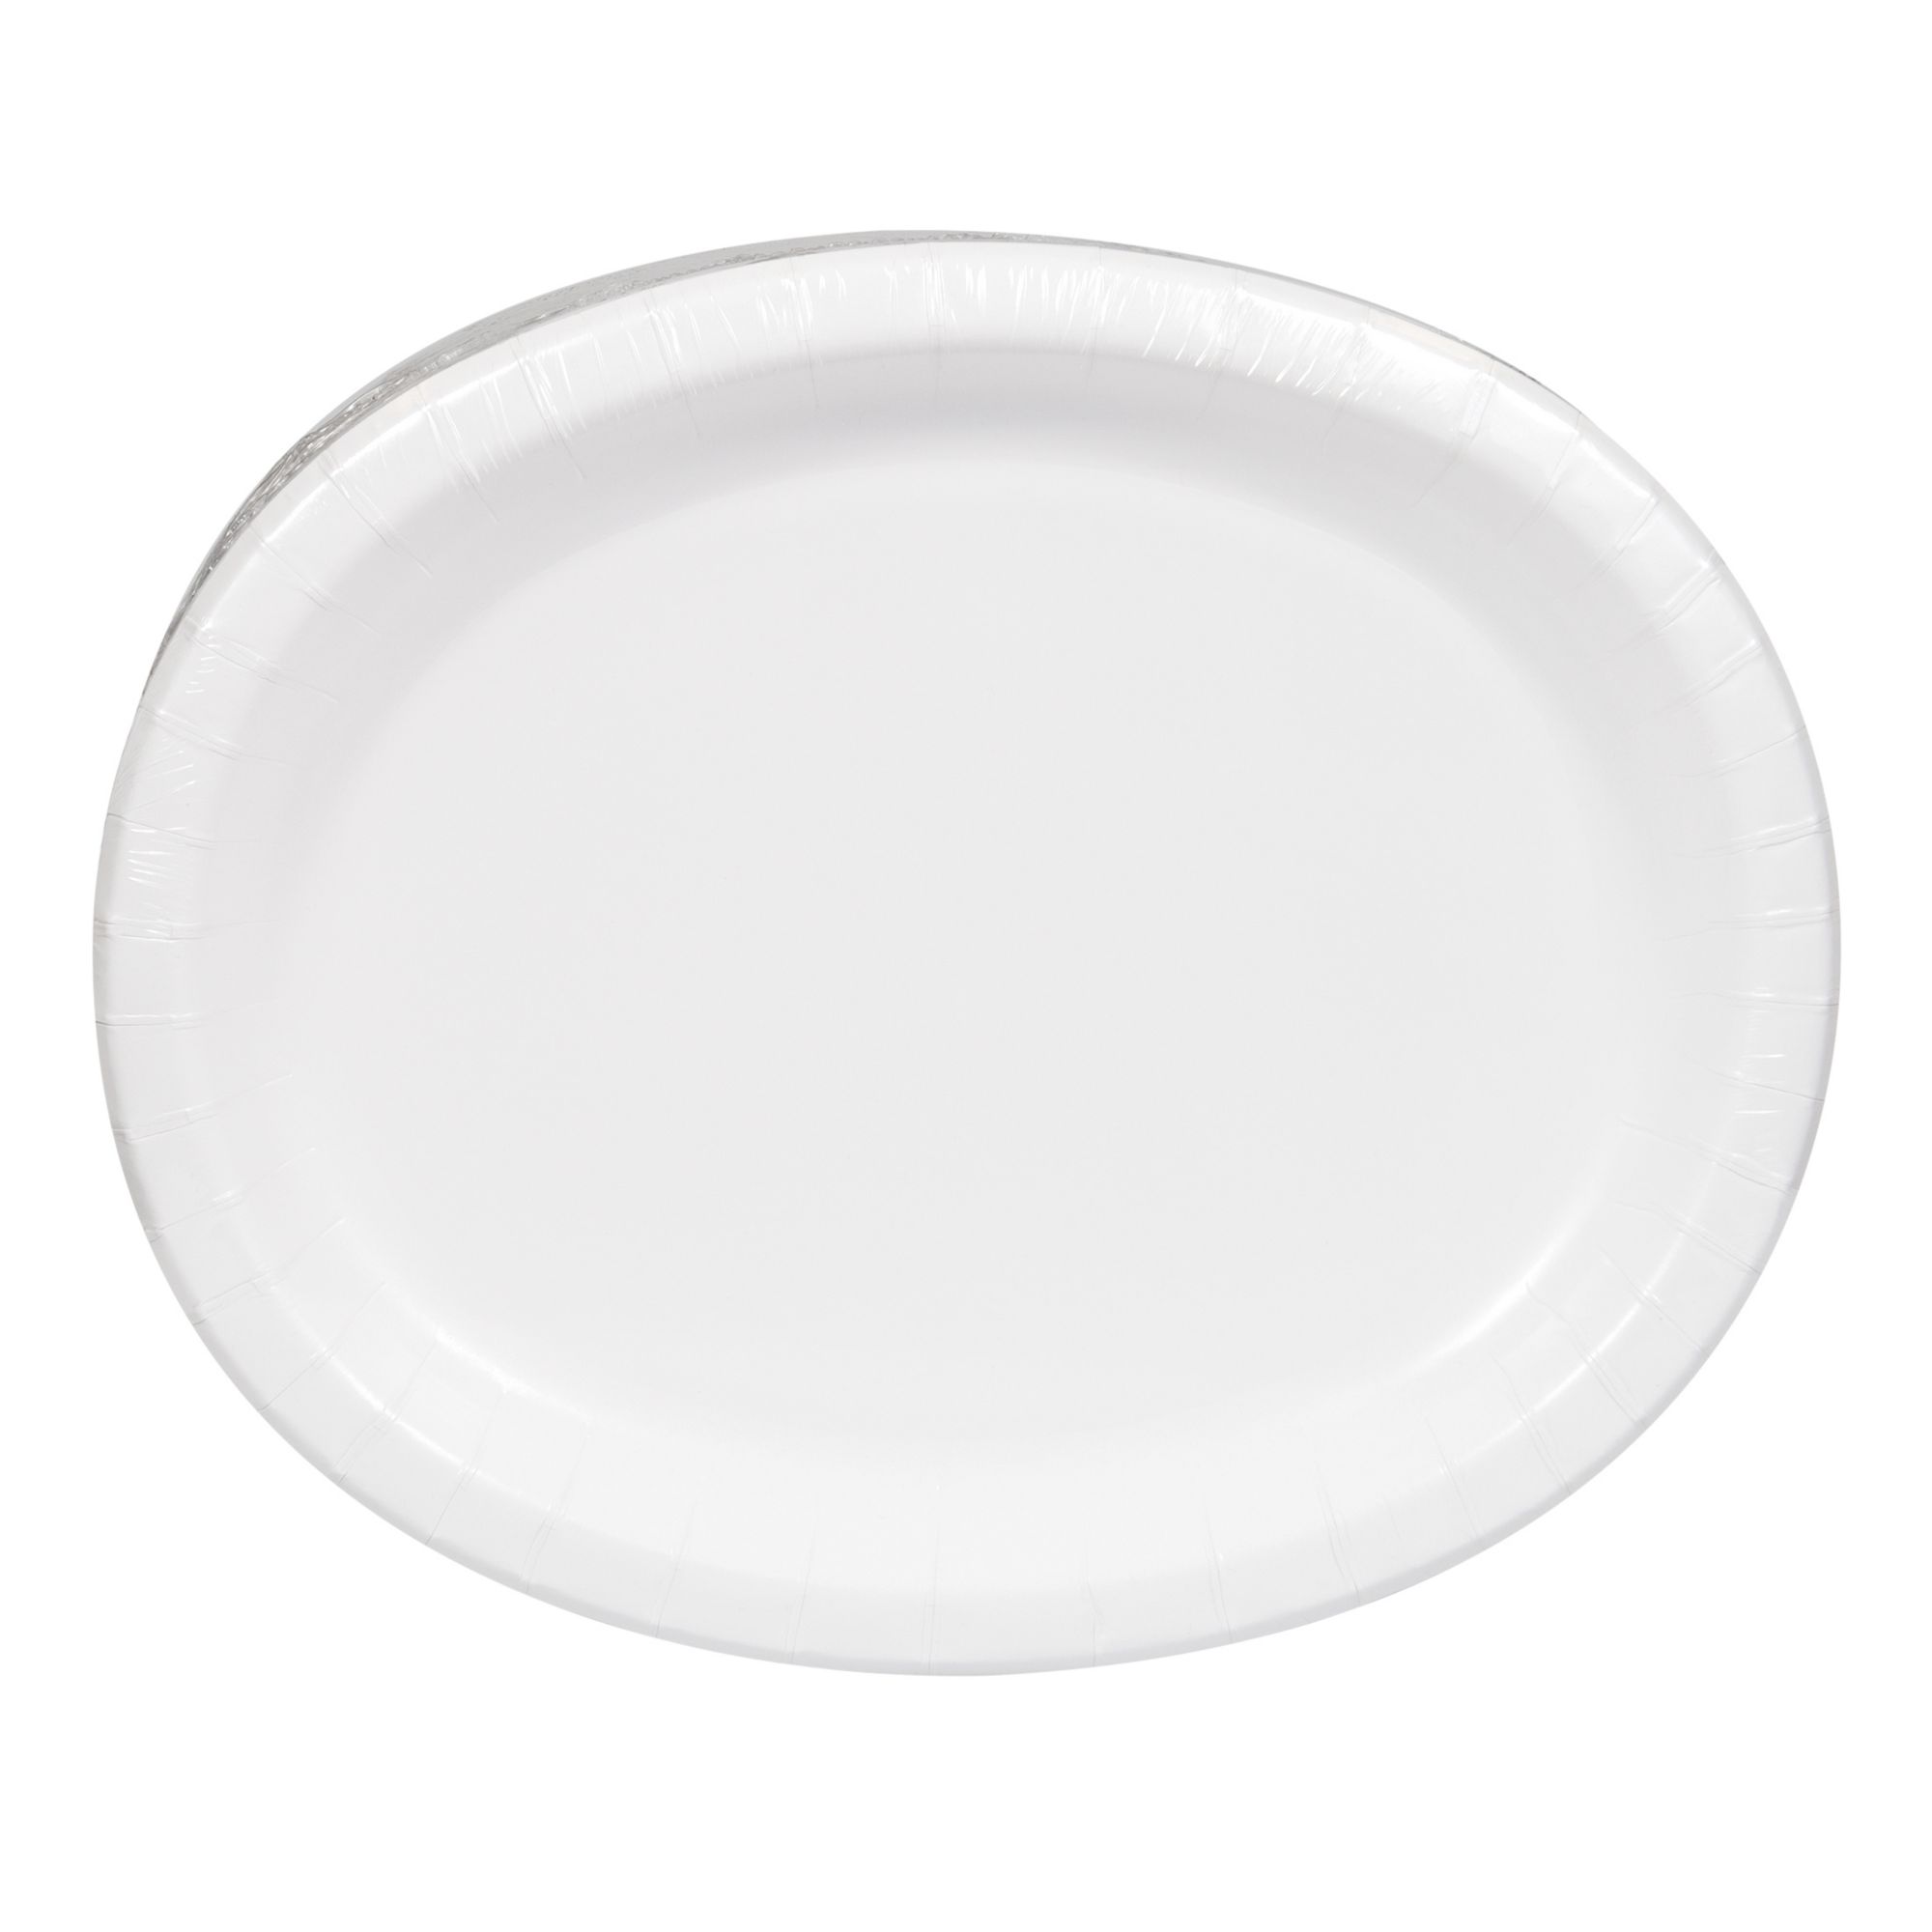 Great Value 9inch Paper Plates, White, 300 Count